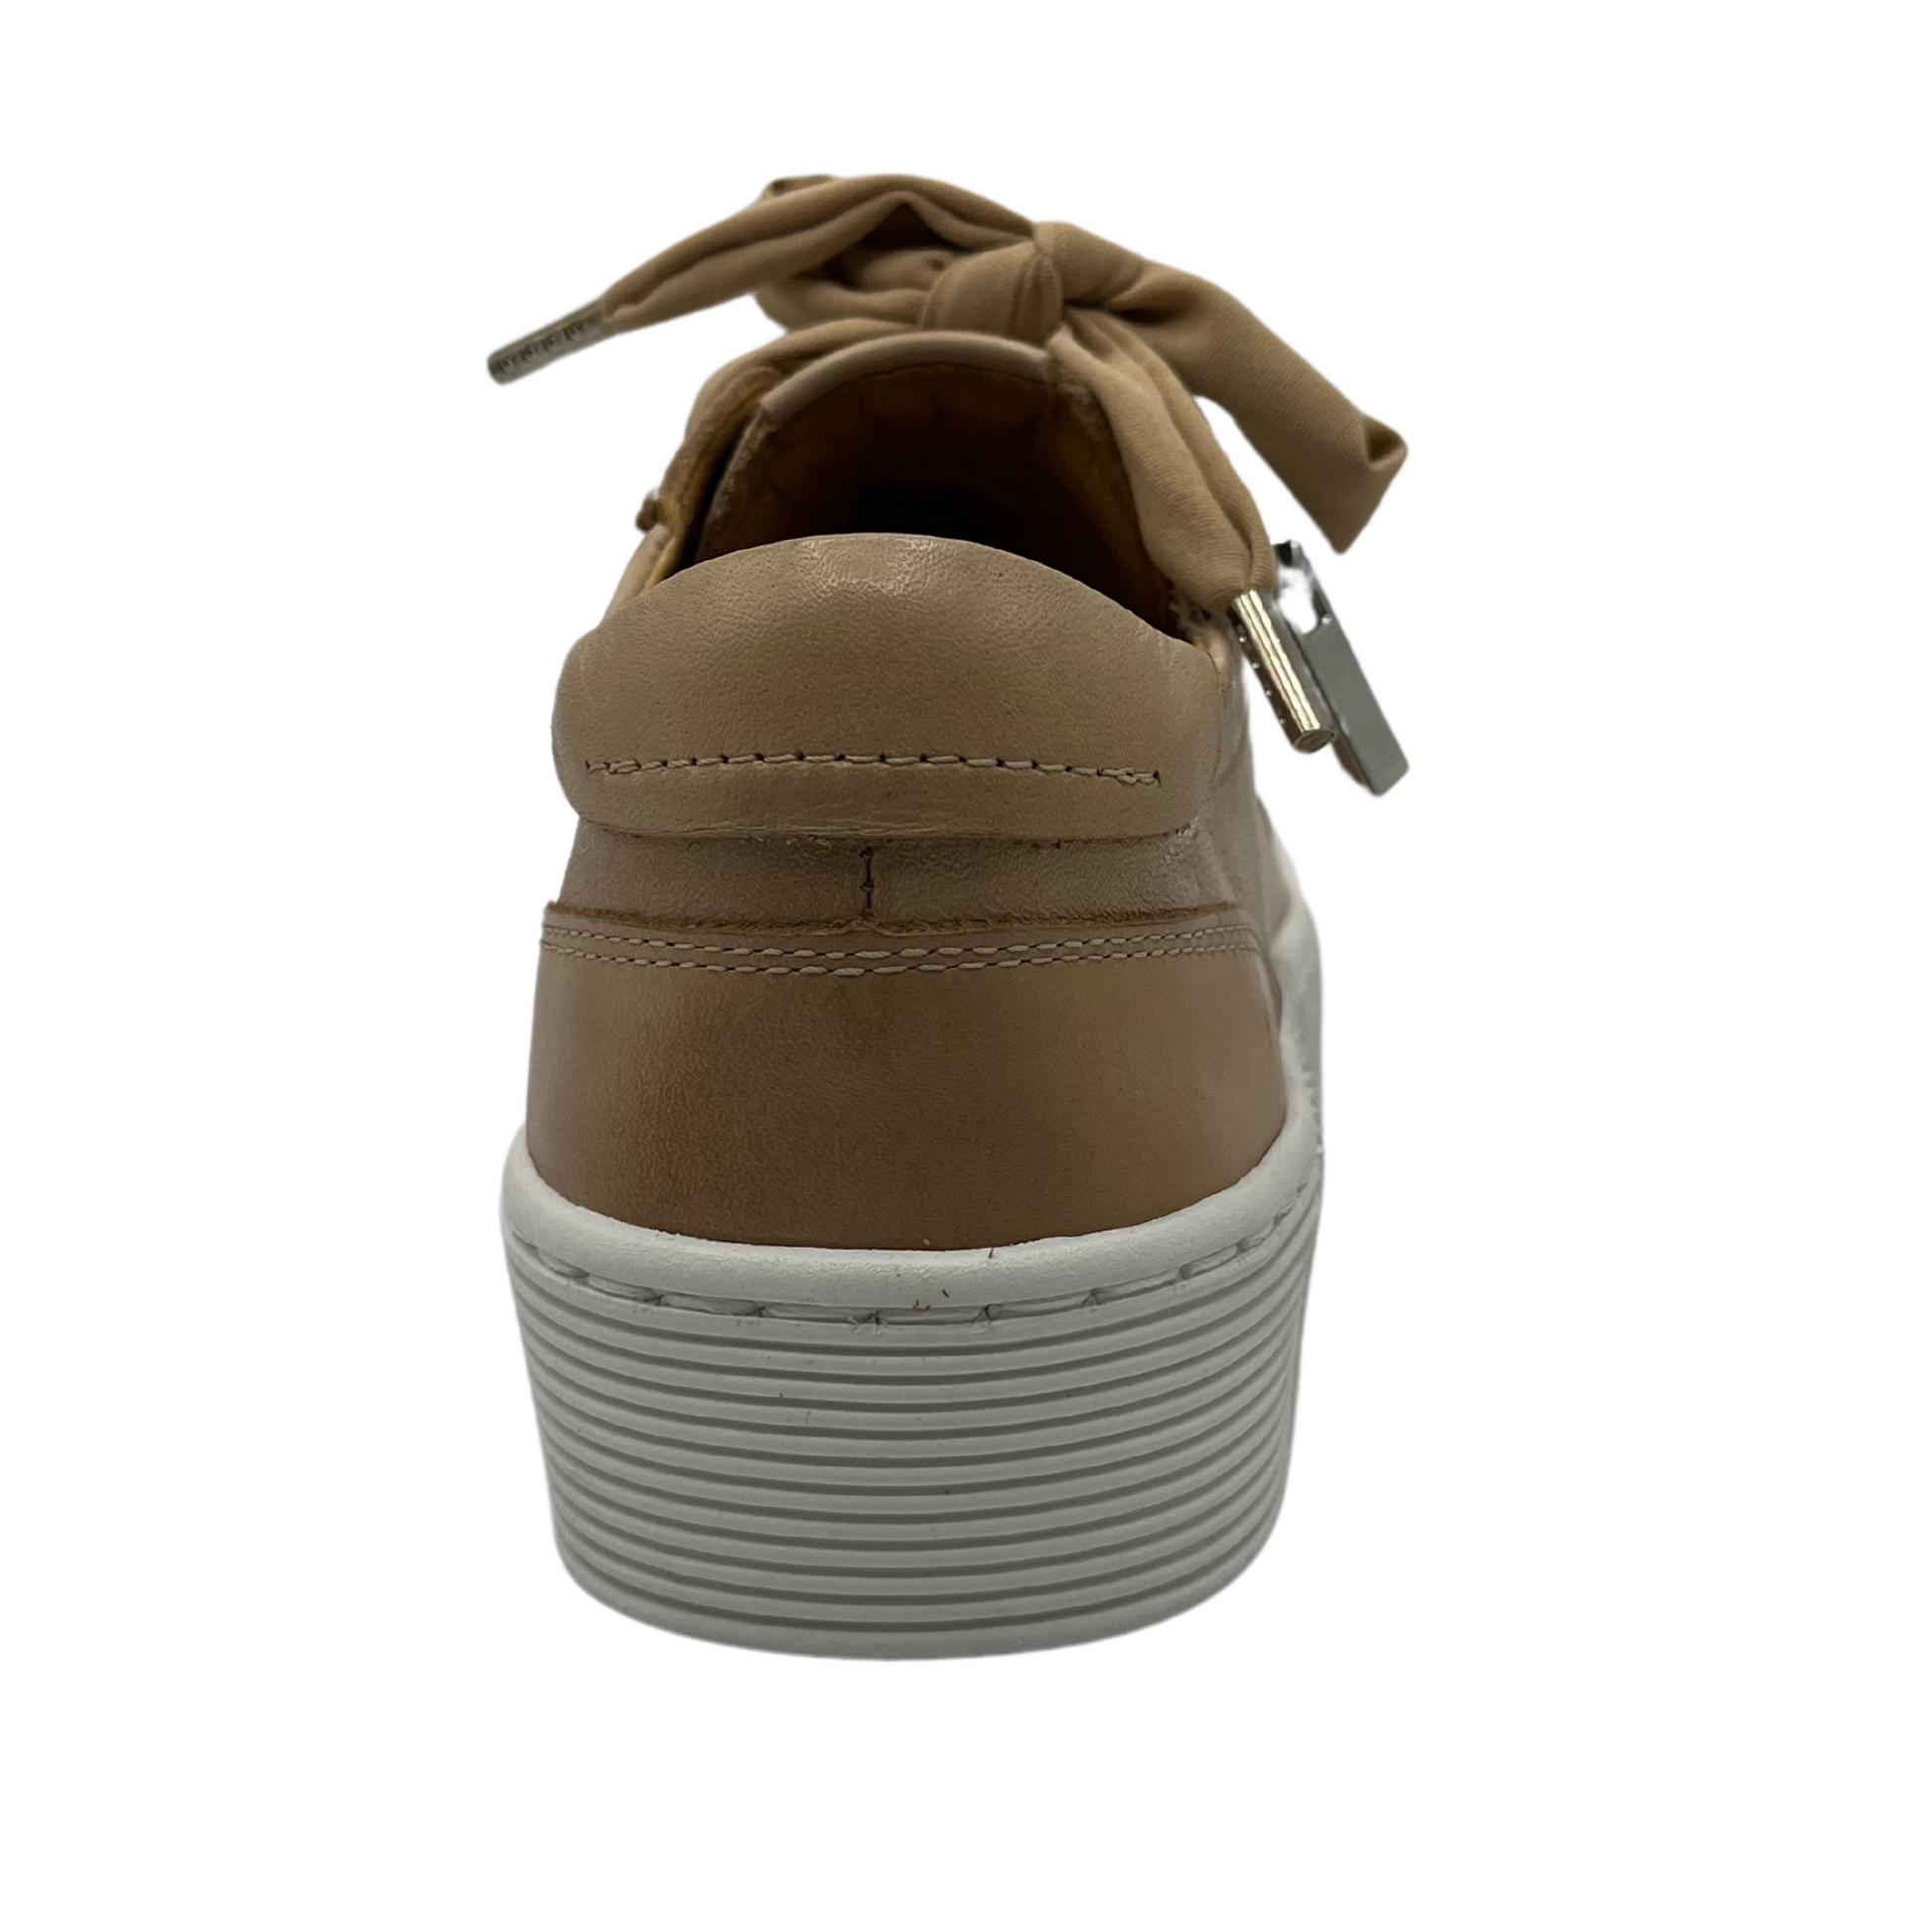 Back view of nude leather sneaker with matching laces and white rubber outsole